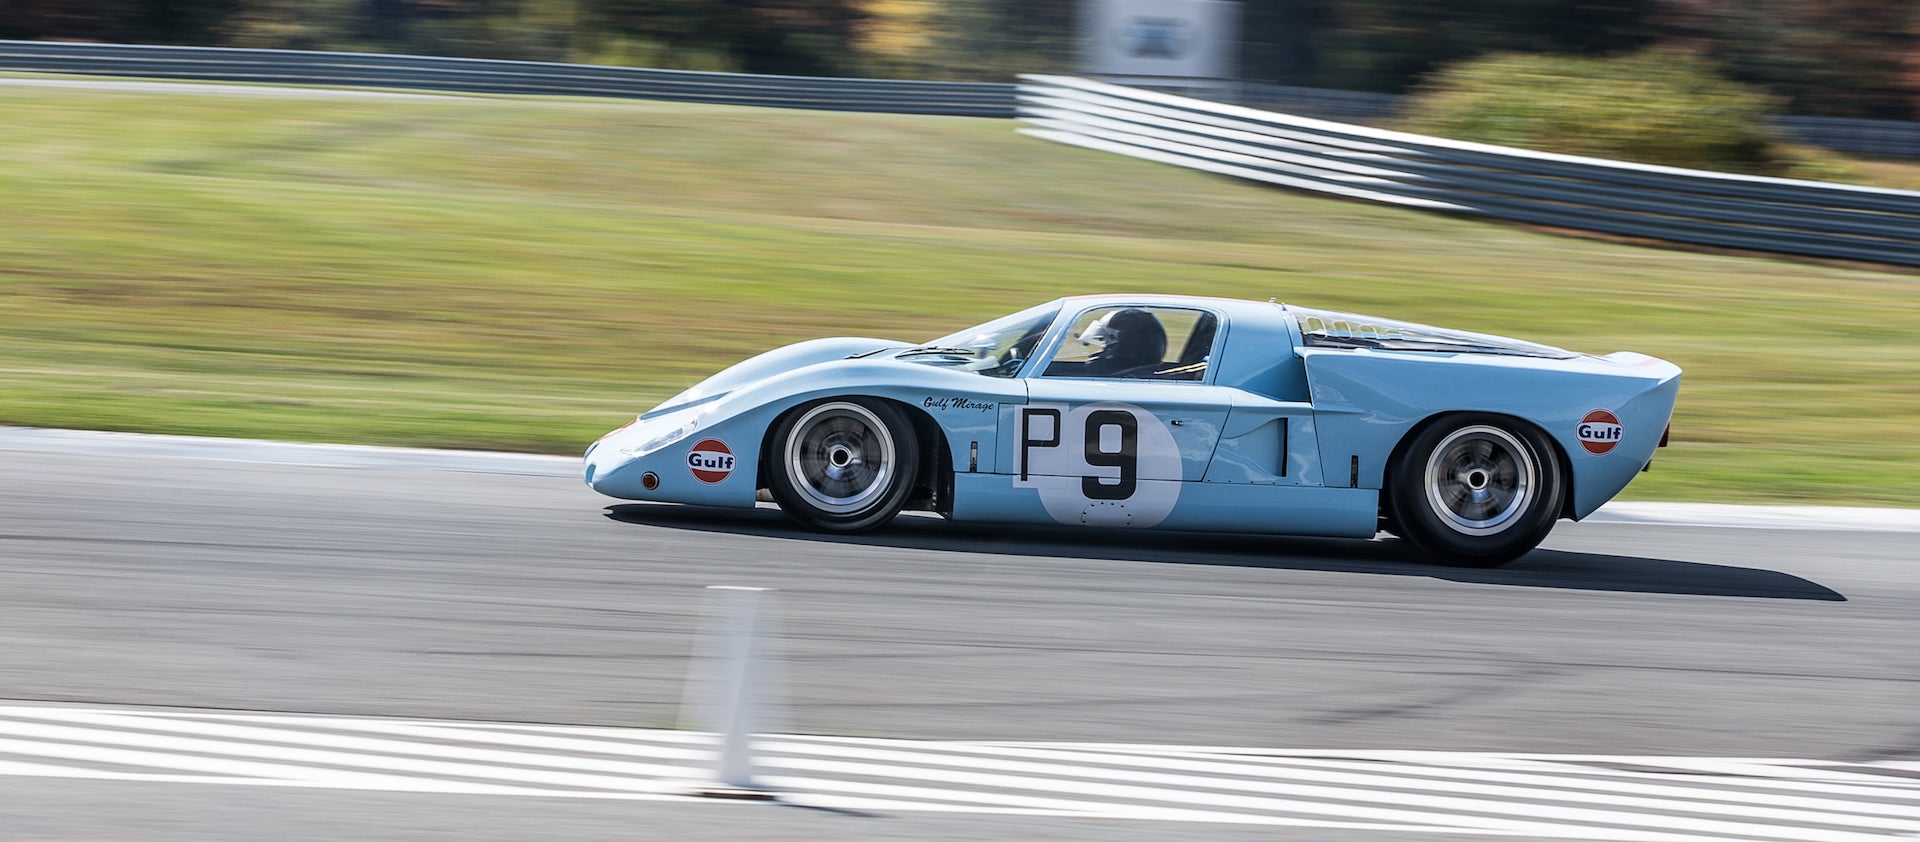 Classic Racers Can’t Stand Still at Art in Motion Concours